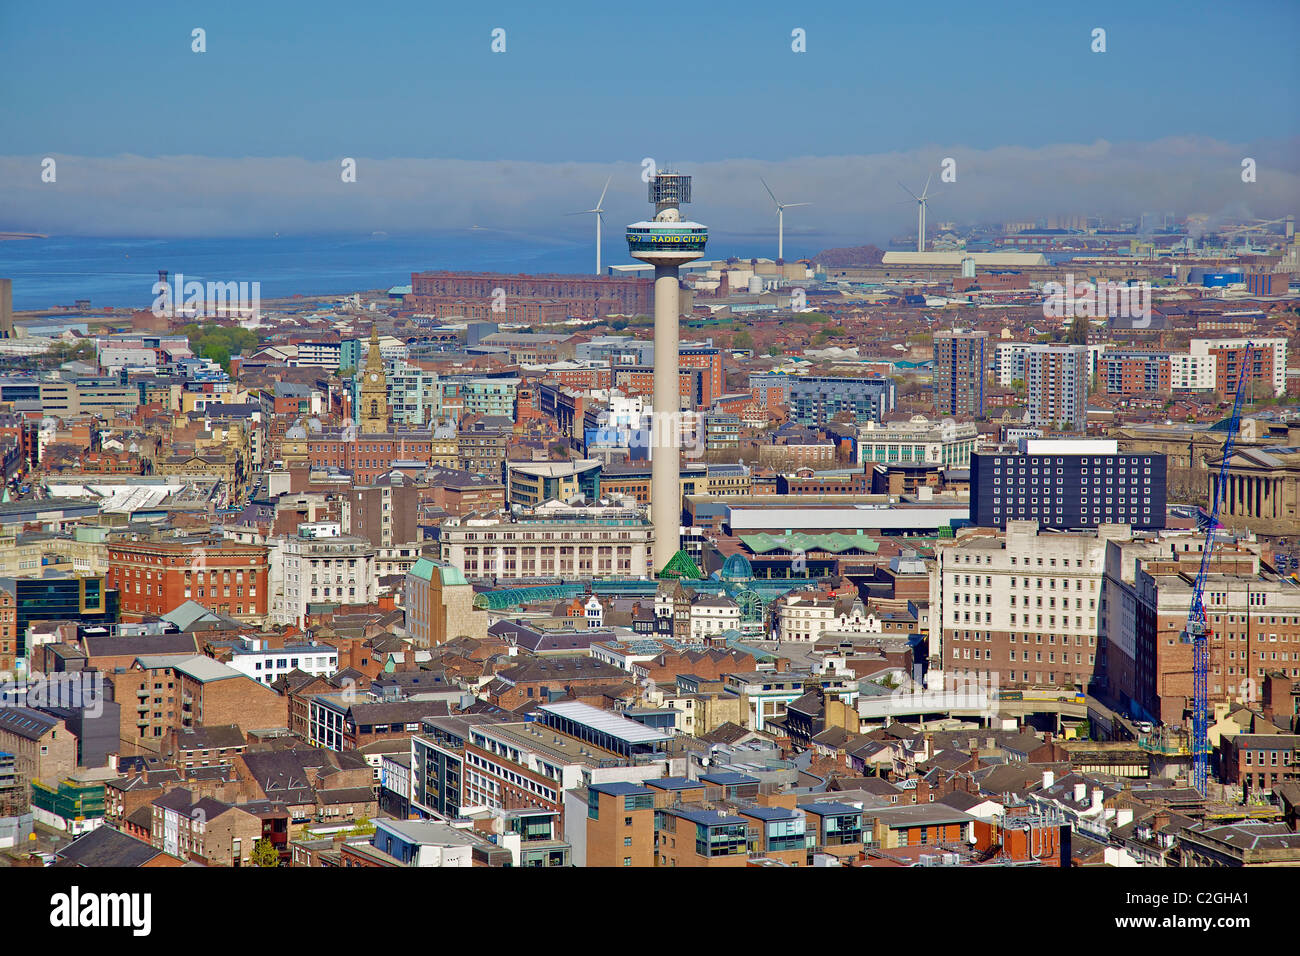 Aerial view of Liverpool city centre from Anglican cathedral tower with the St. John's beacon in the centre. Stock Photo